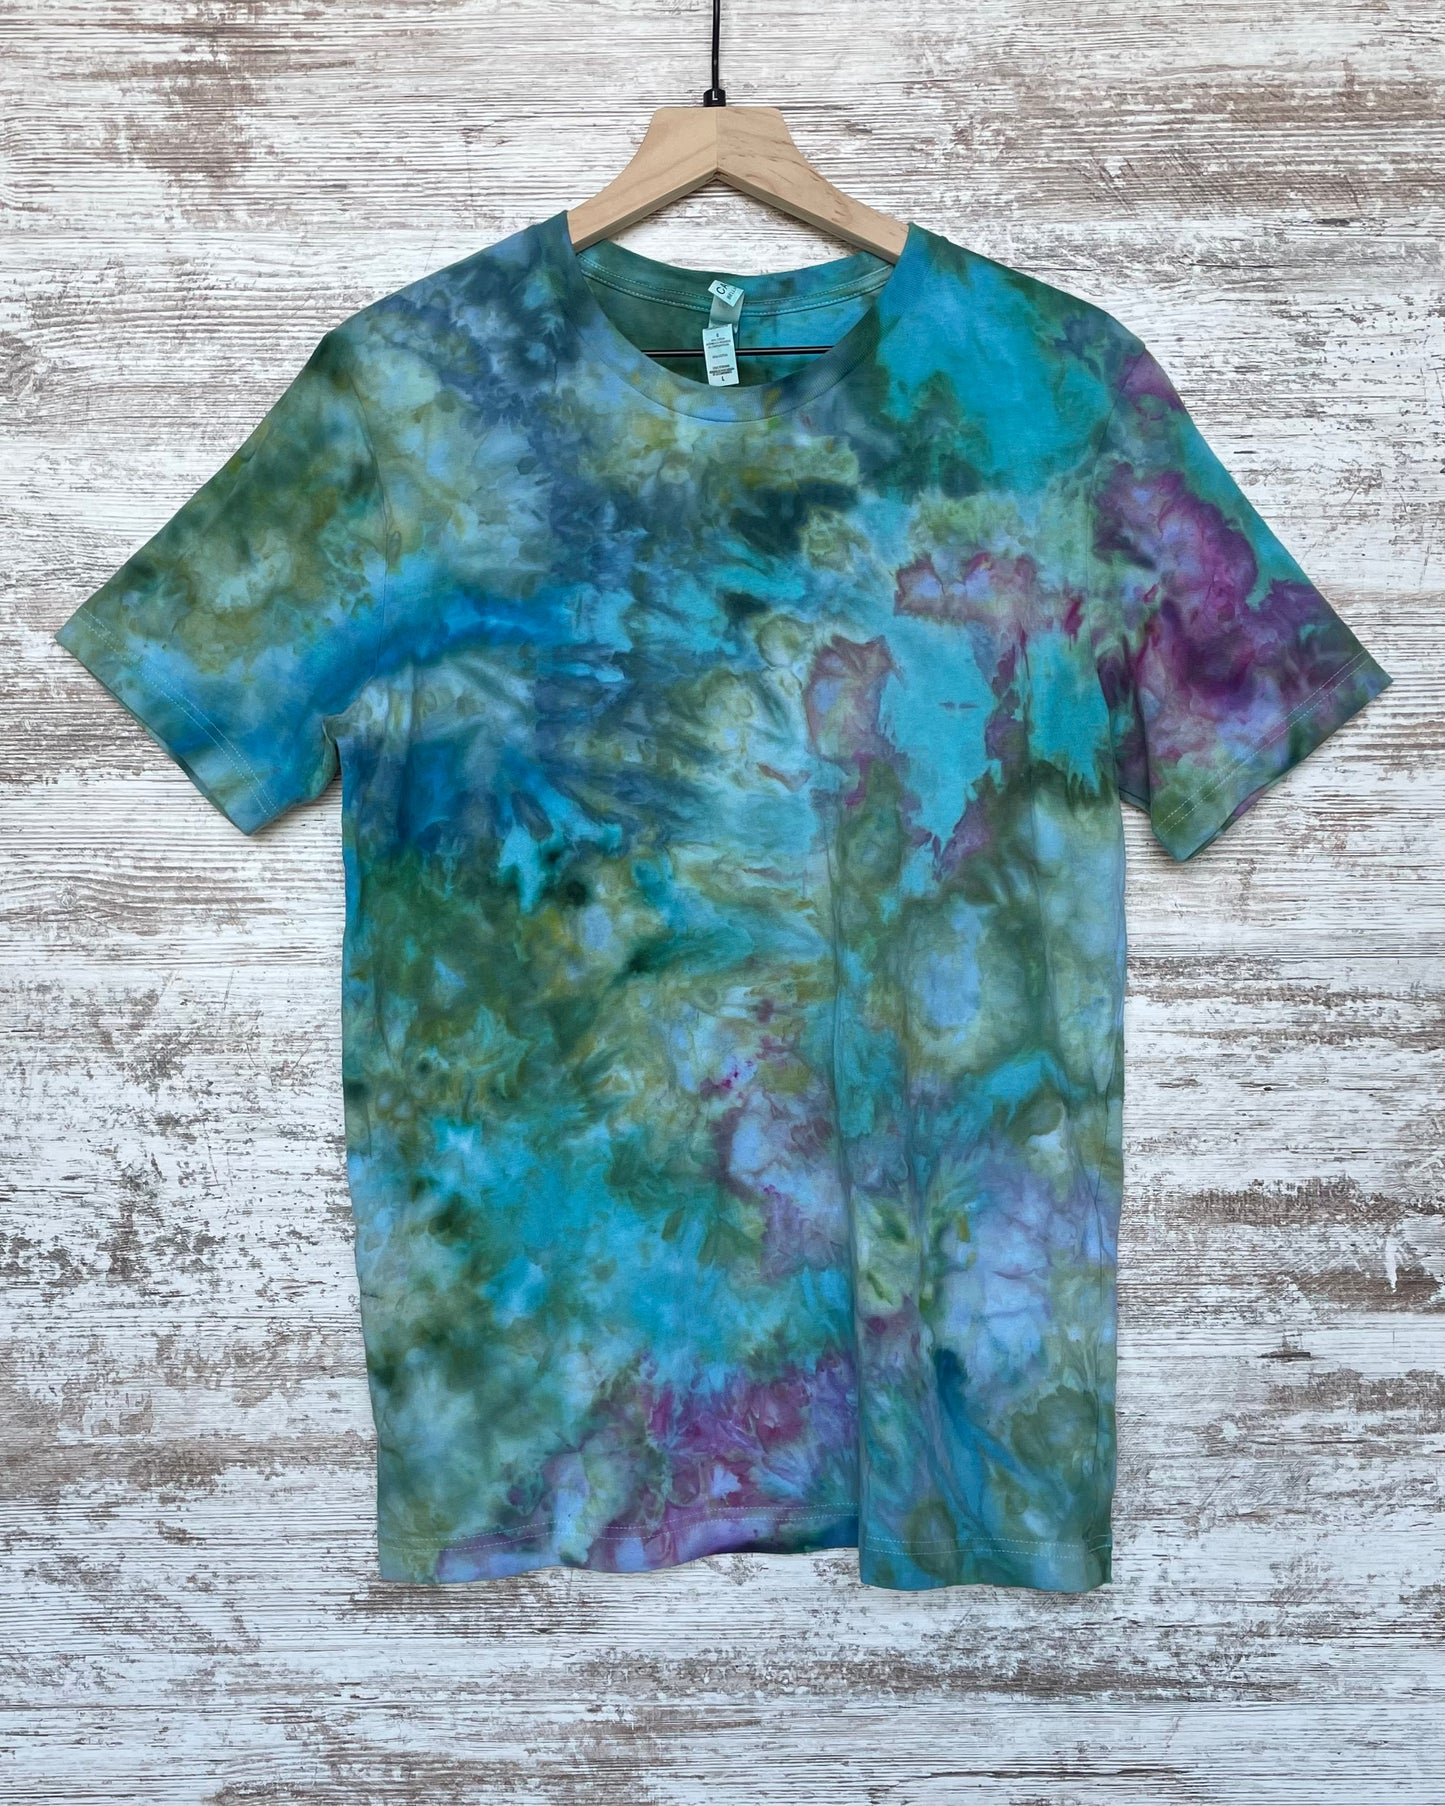 Peacock Ice-Dyed Adult Unisex T-shirt